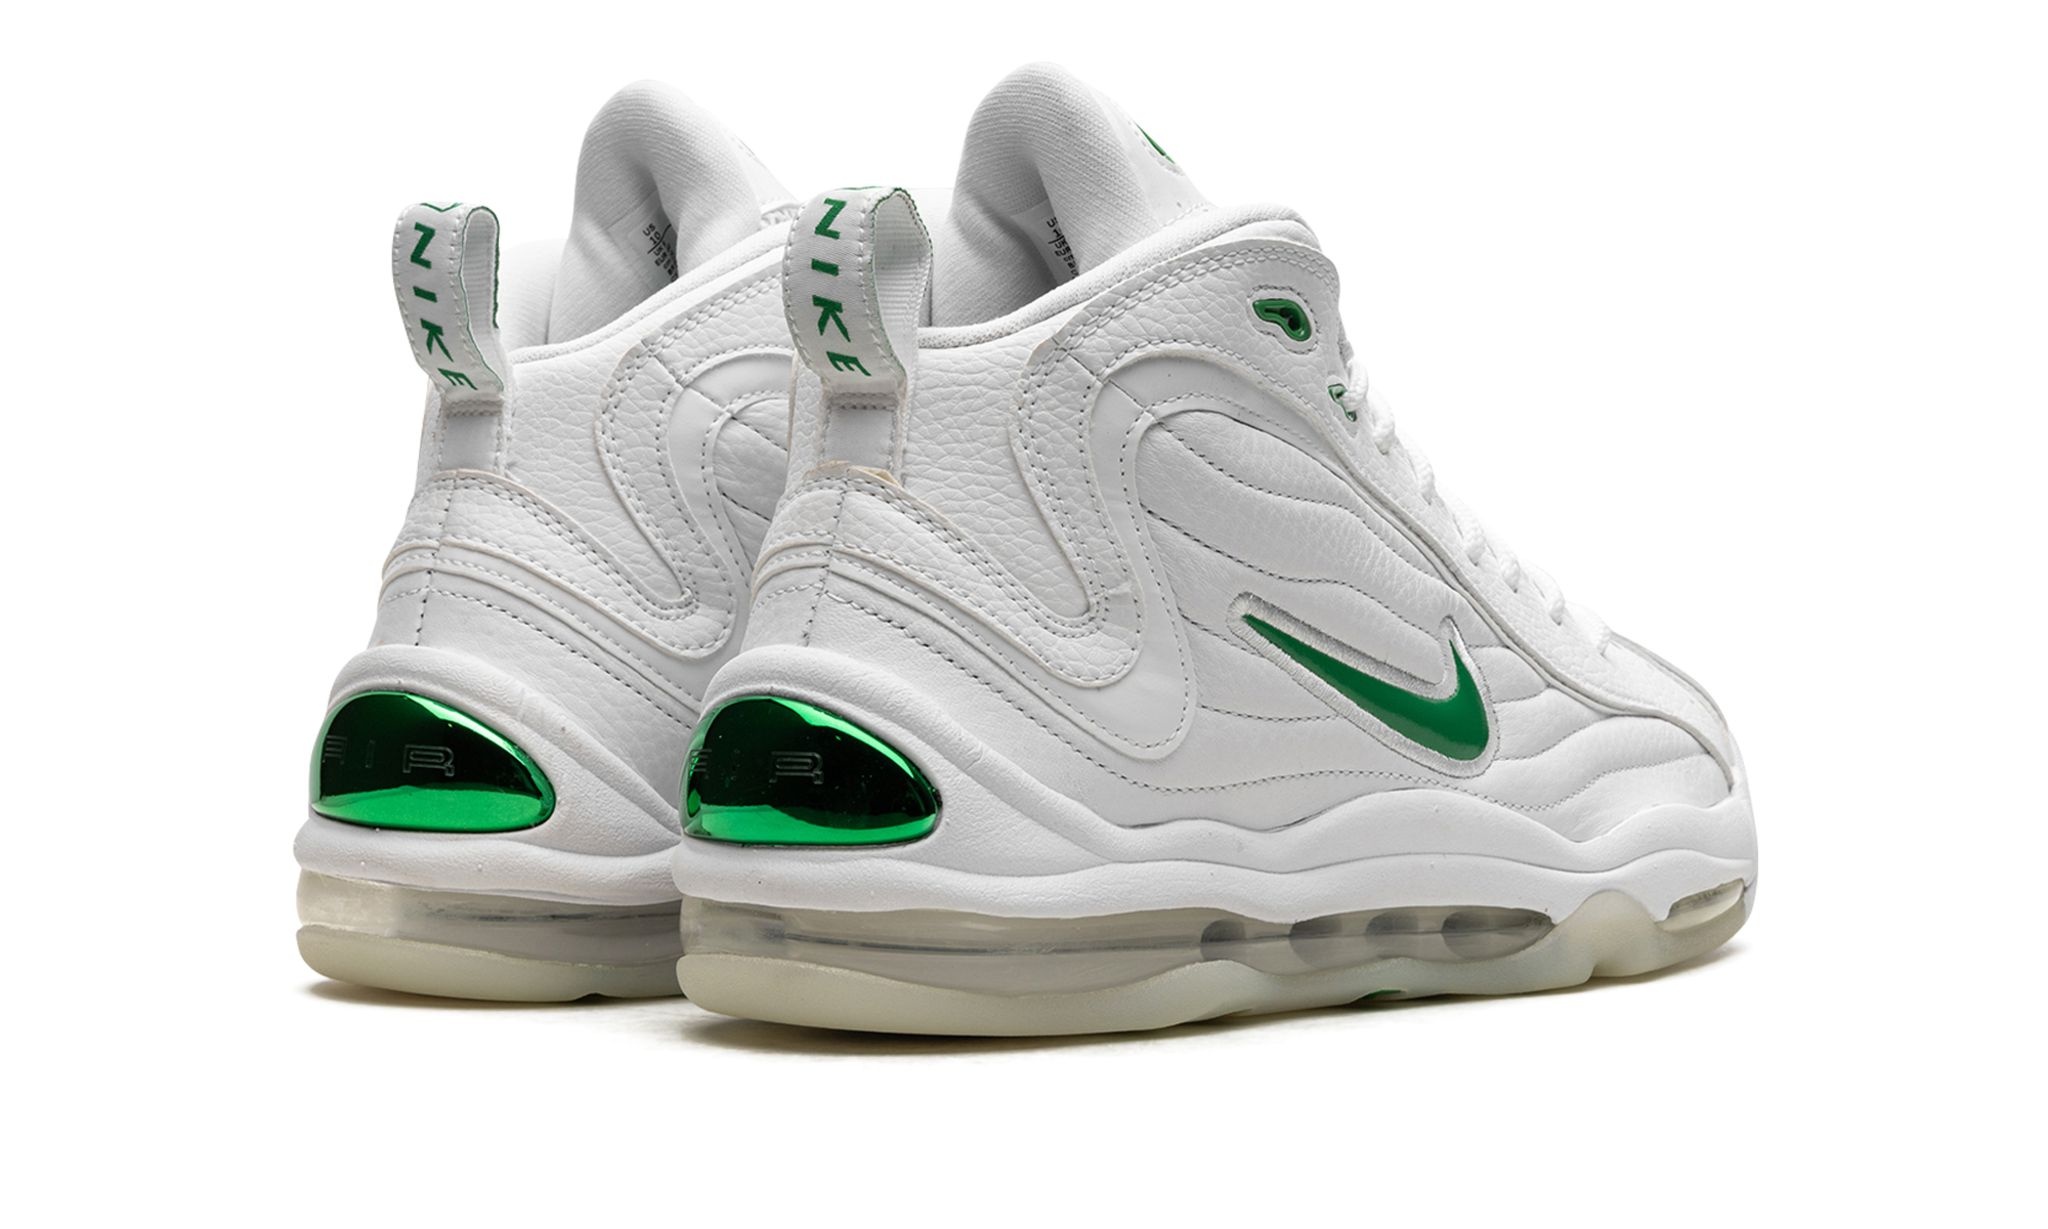 Air Total Max Uptempo "Classic Green" - 3